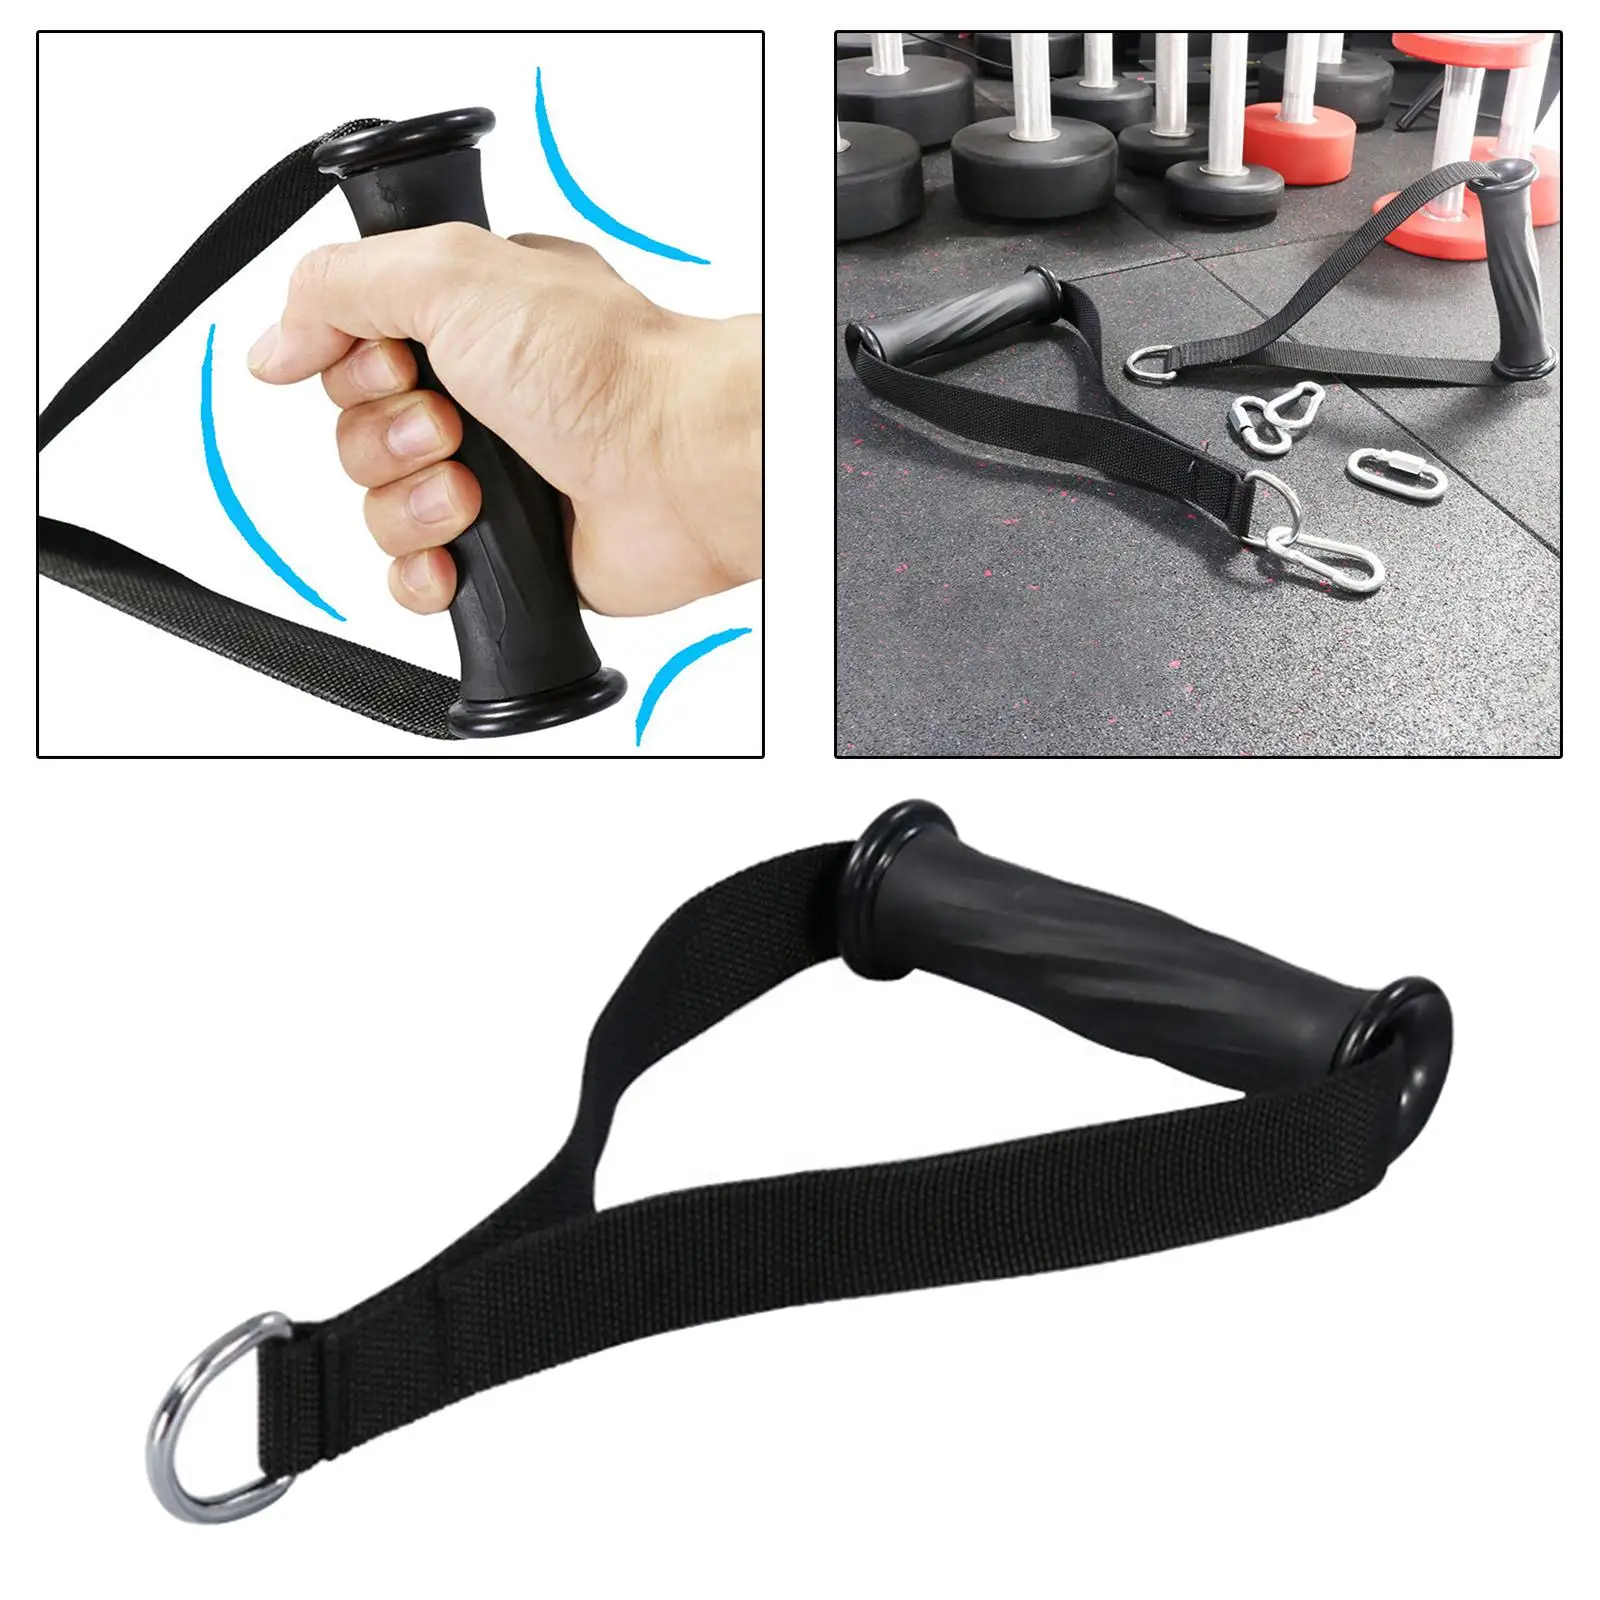 Gym Resistance Bands Handles Anti-slip Grip Strong Nylon Webbing Fitness Heavy Duty Cable Machine Workout Equipment